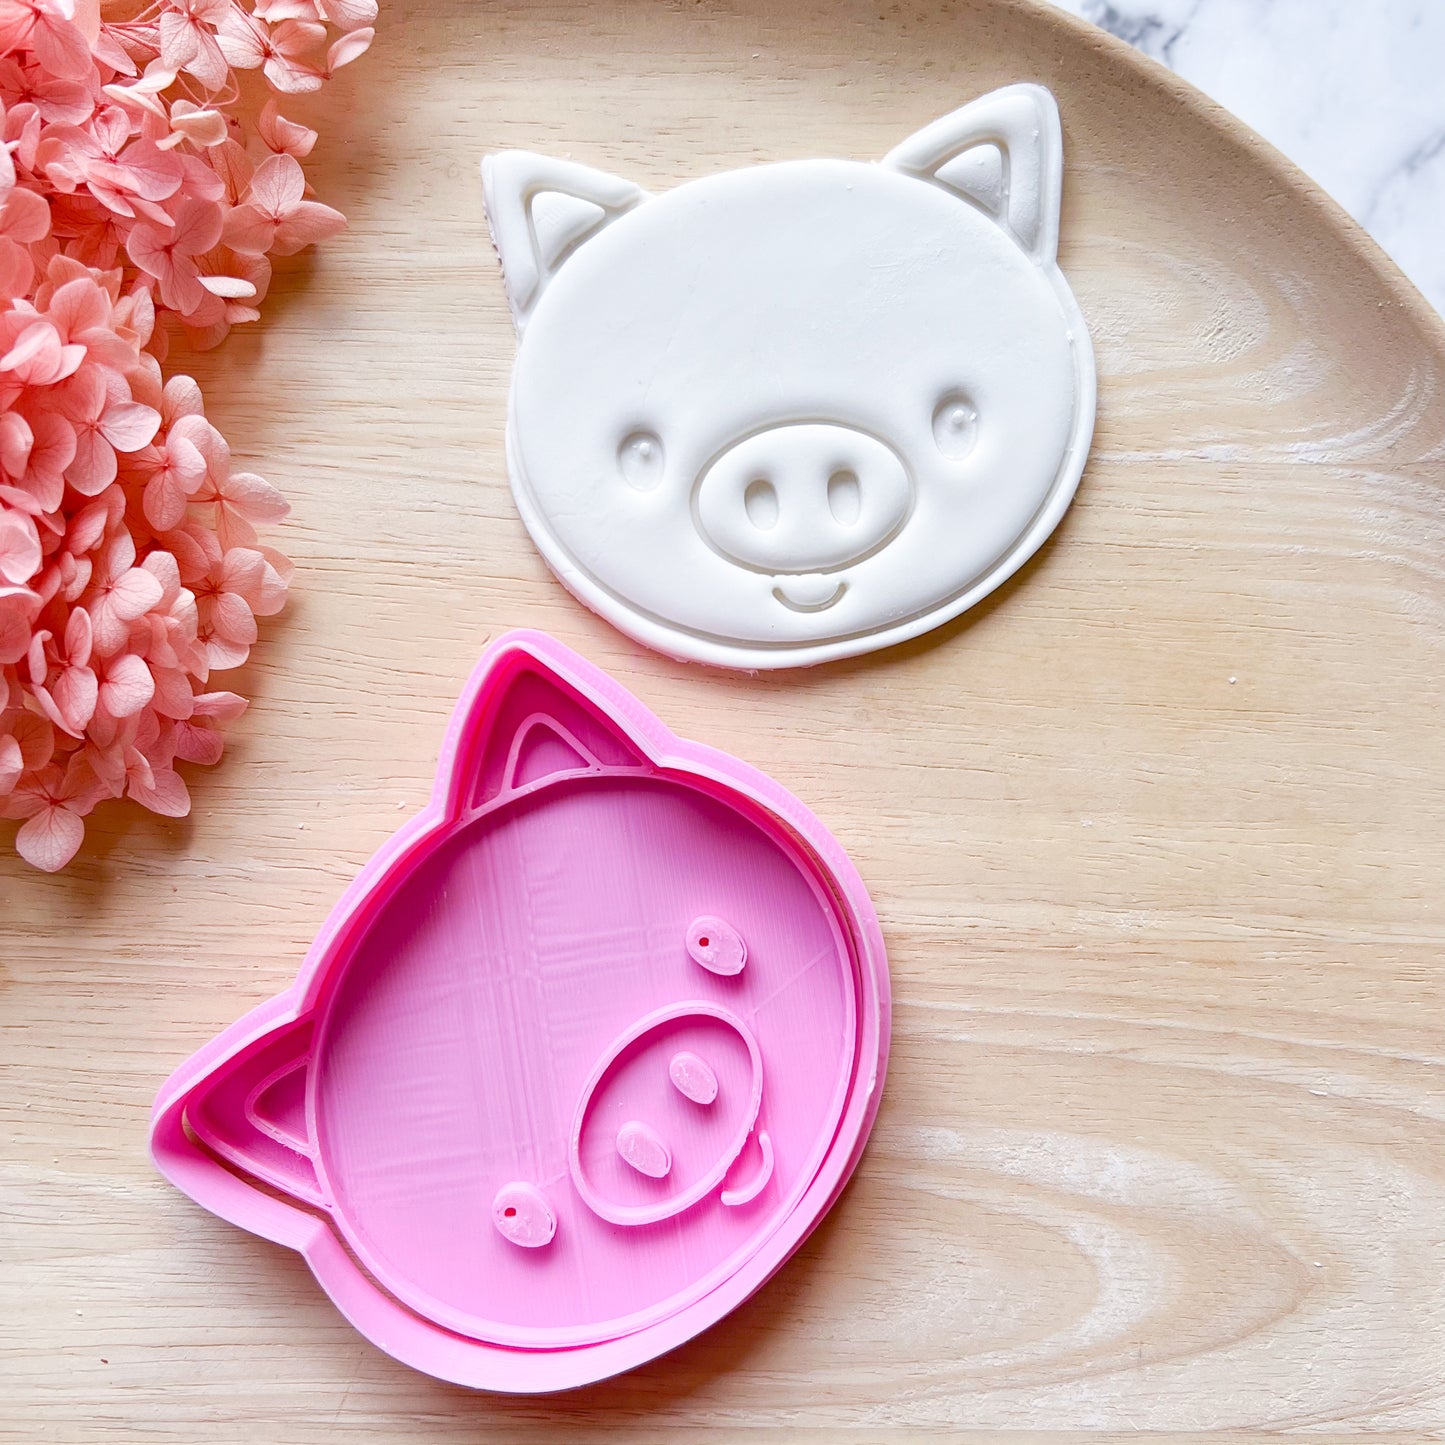 Baby Pig Cookie Cutter & Stamp